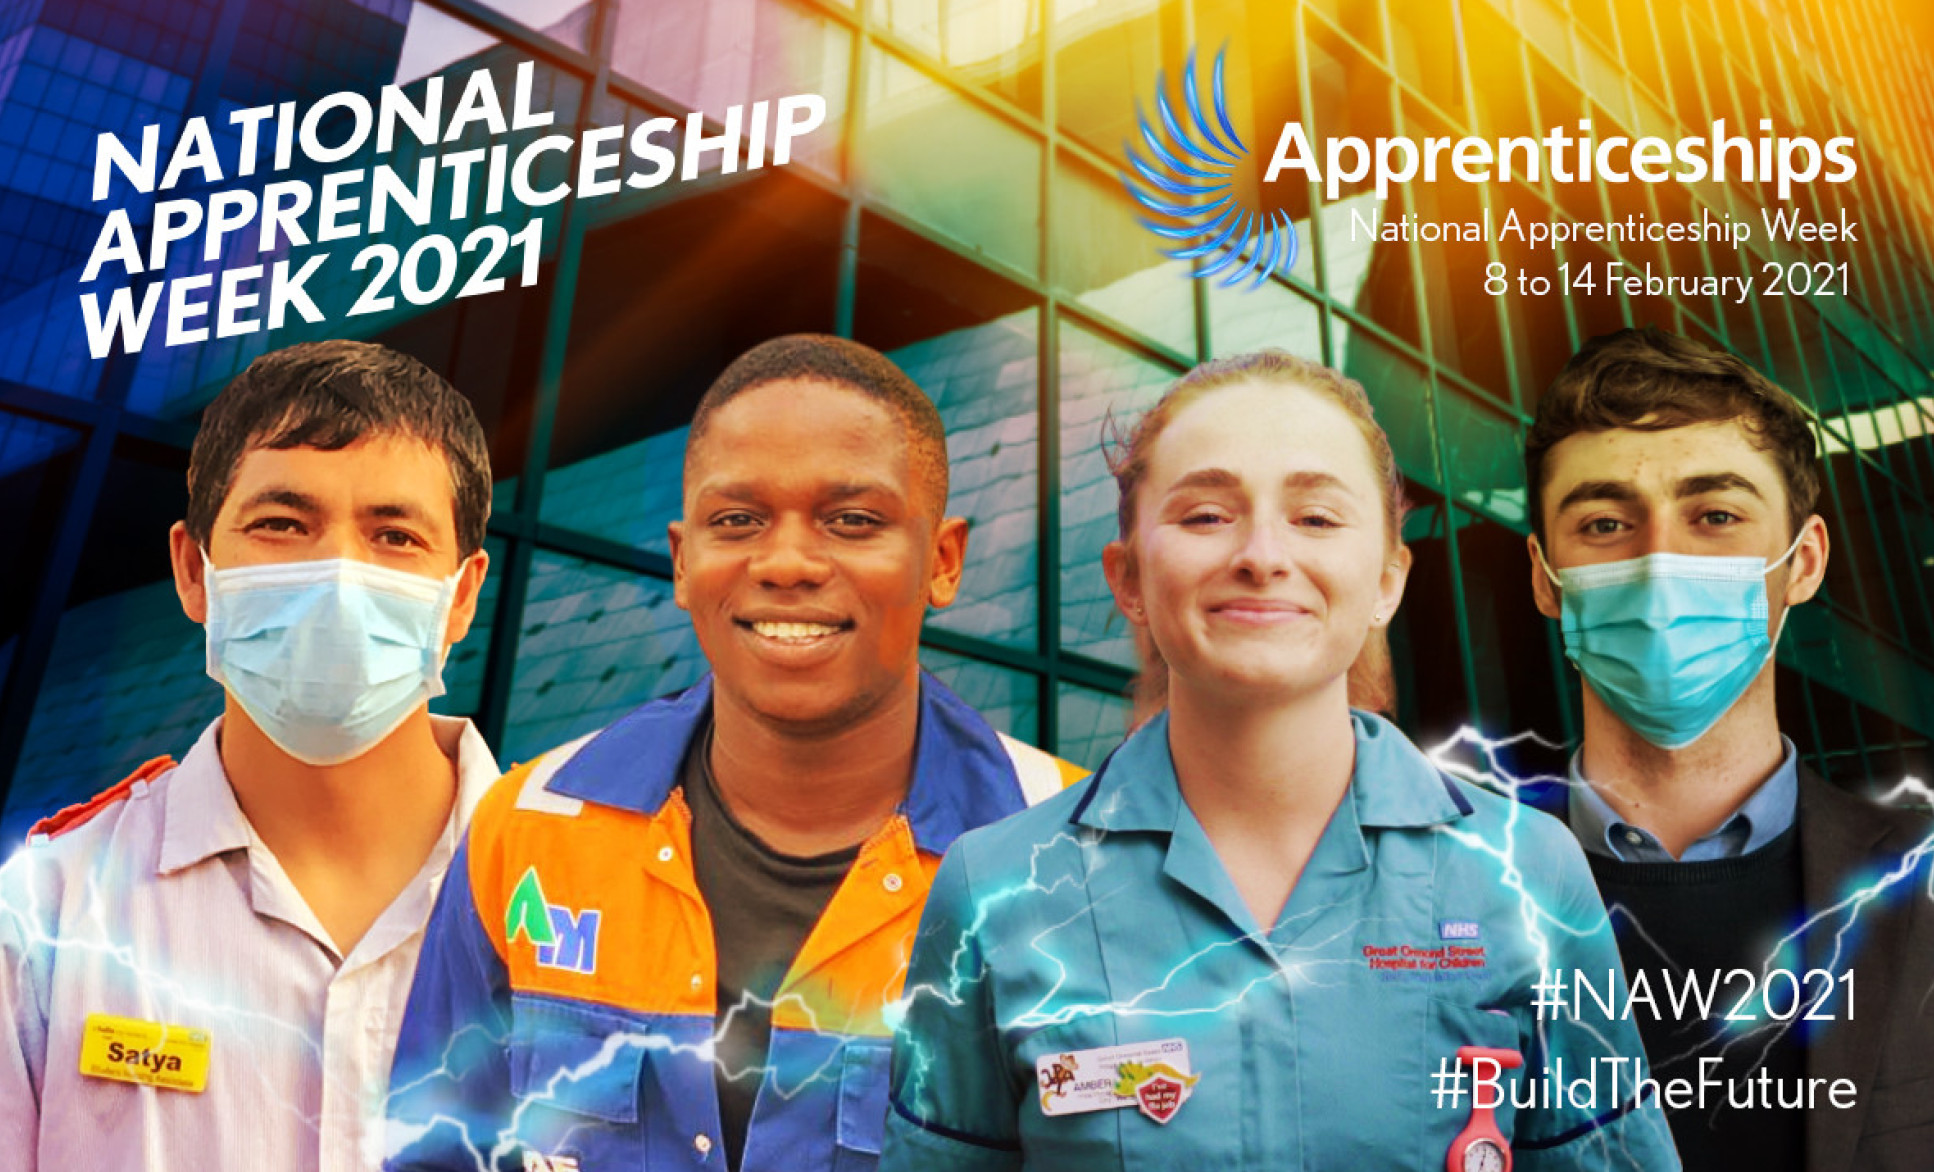 National Apprenticeships Week "take a new look at apprenticeships